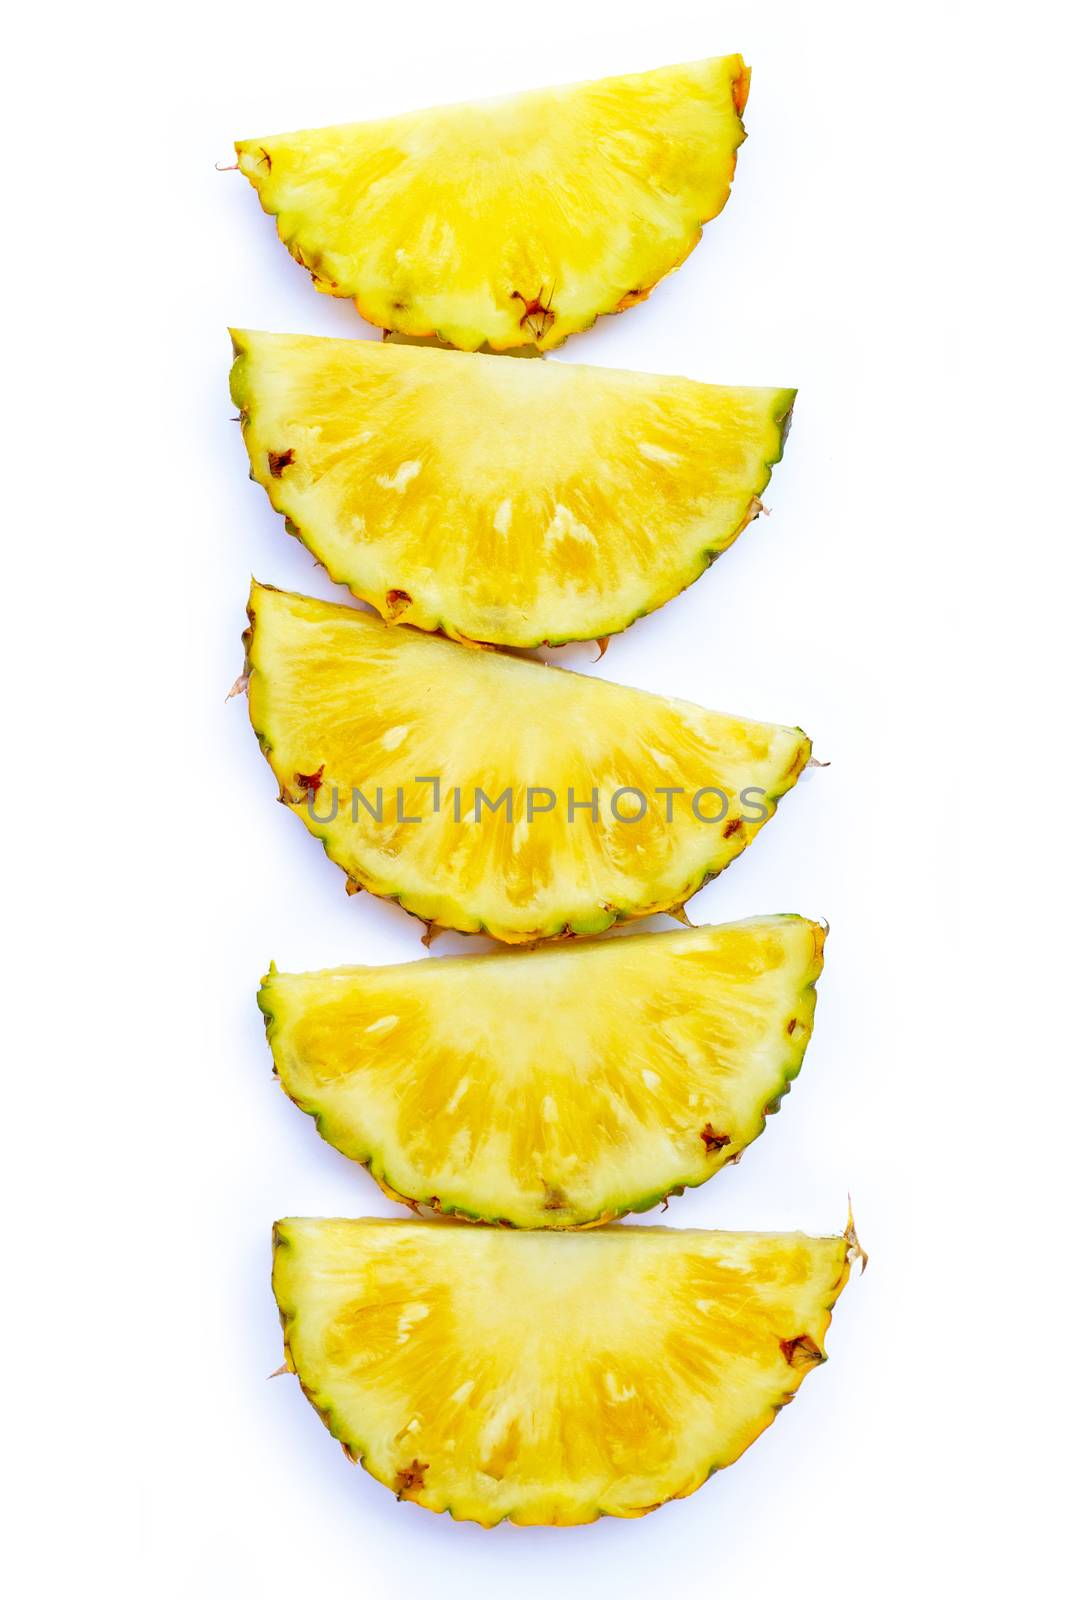 Fresh pineapple slices on white background.  by Bowonpat